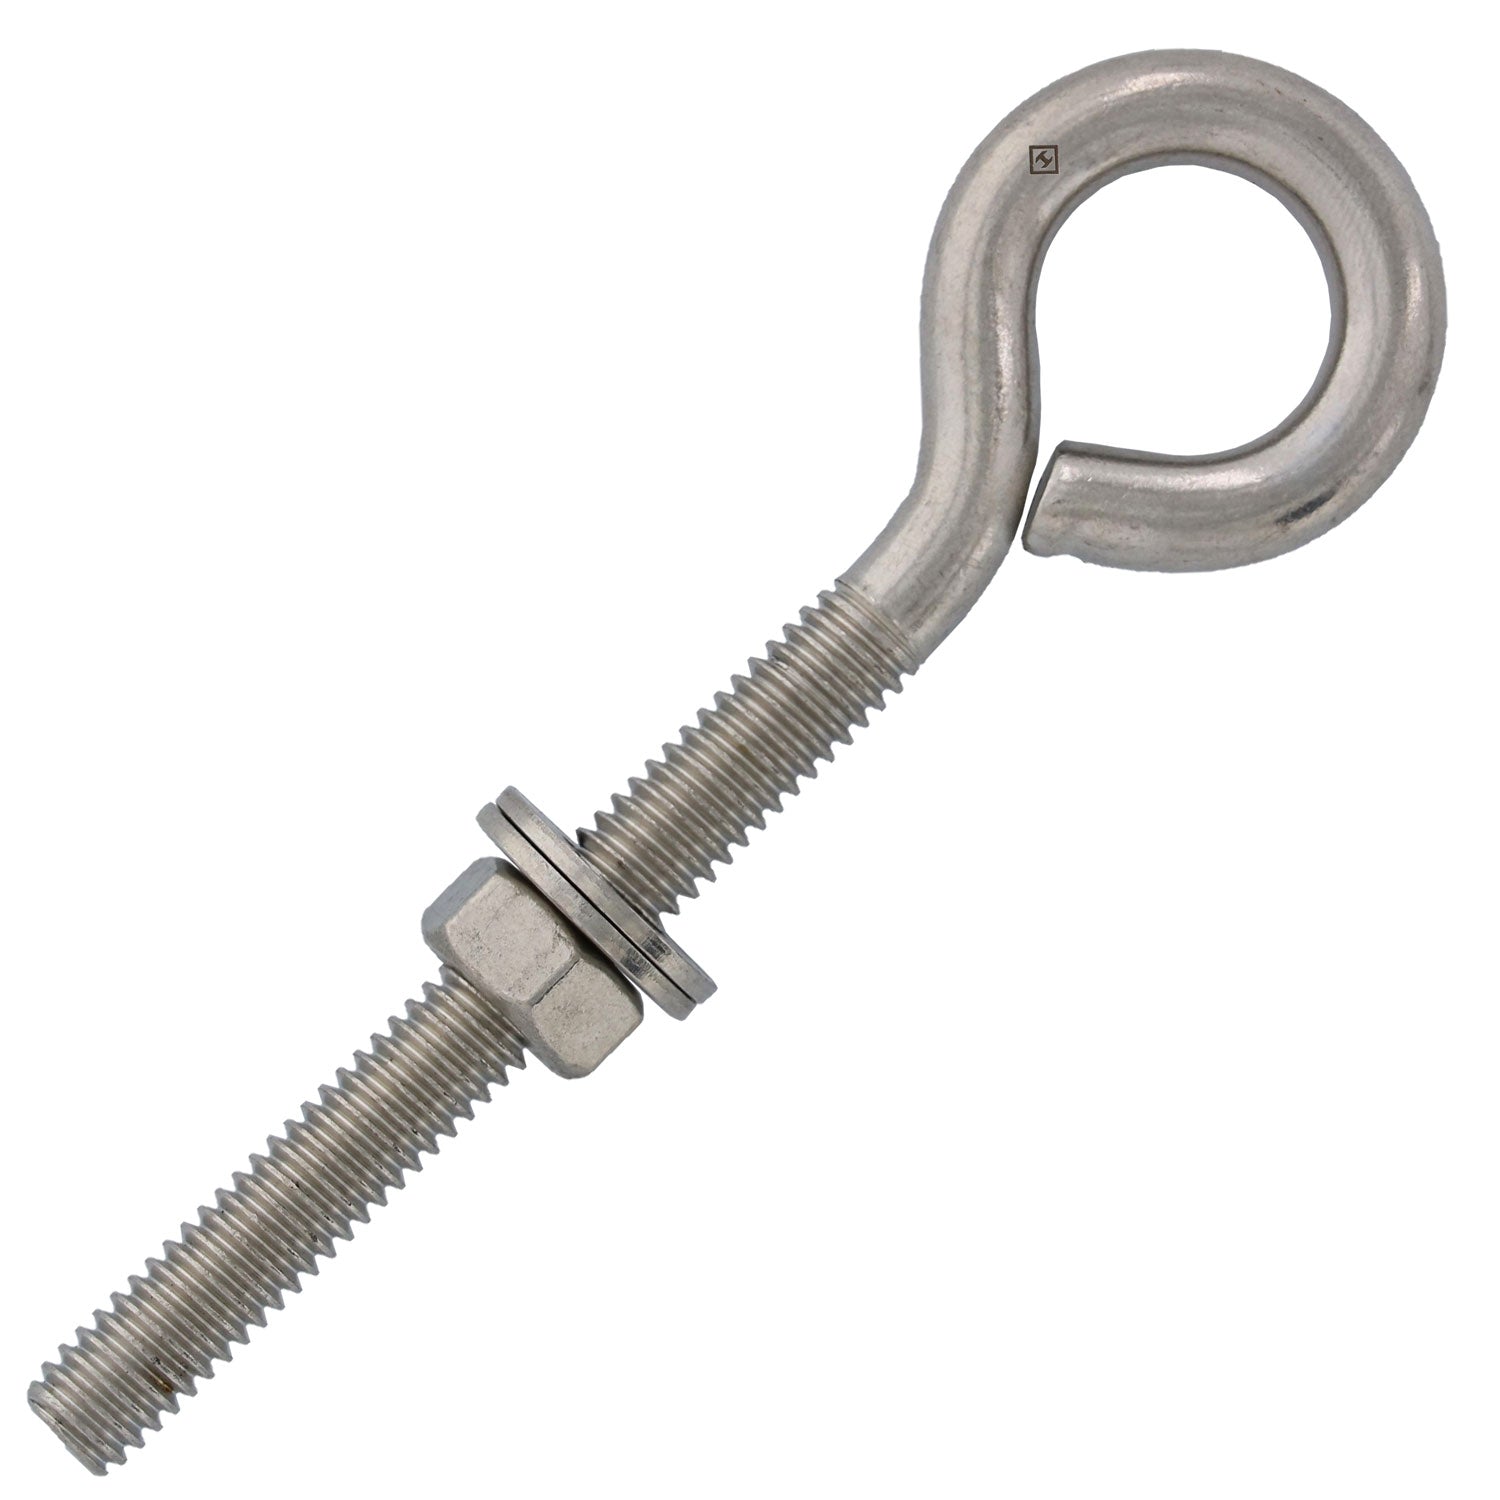 Stainless Steel Eye Bolt N221614  Pack of 10 x 3-1/4 In National 5/16 In 